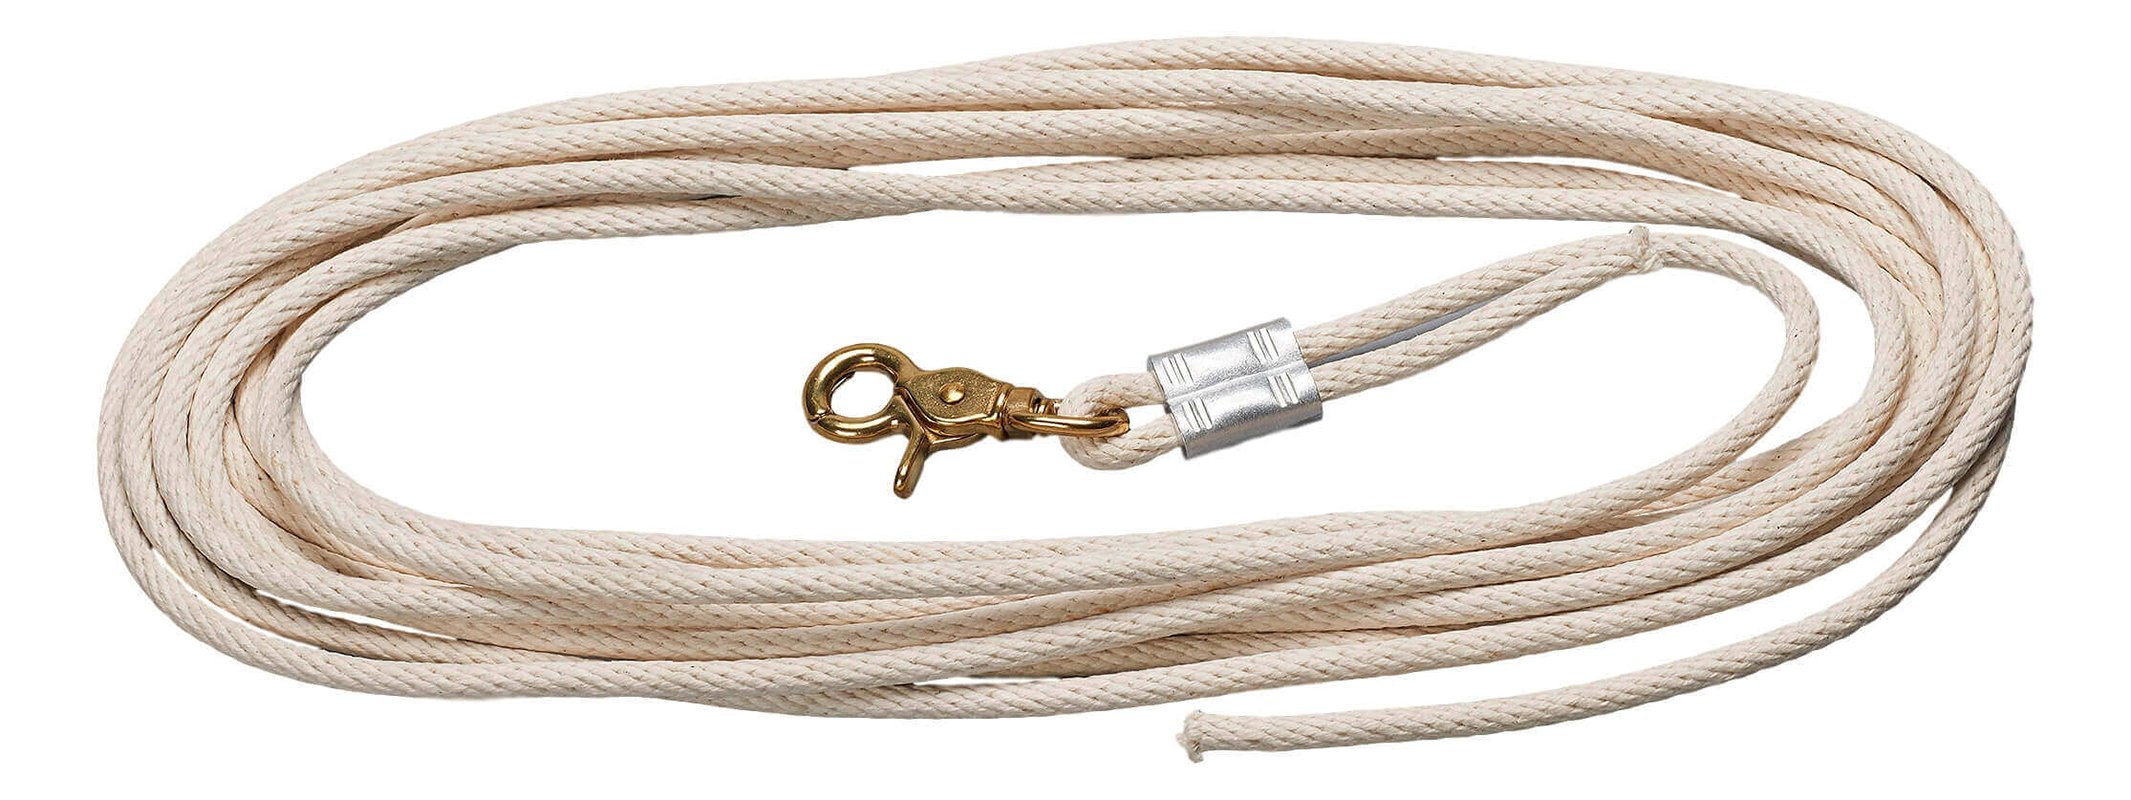 Thief Rope Plain with Fittings, 25'